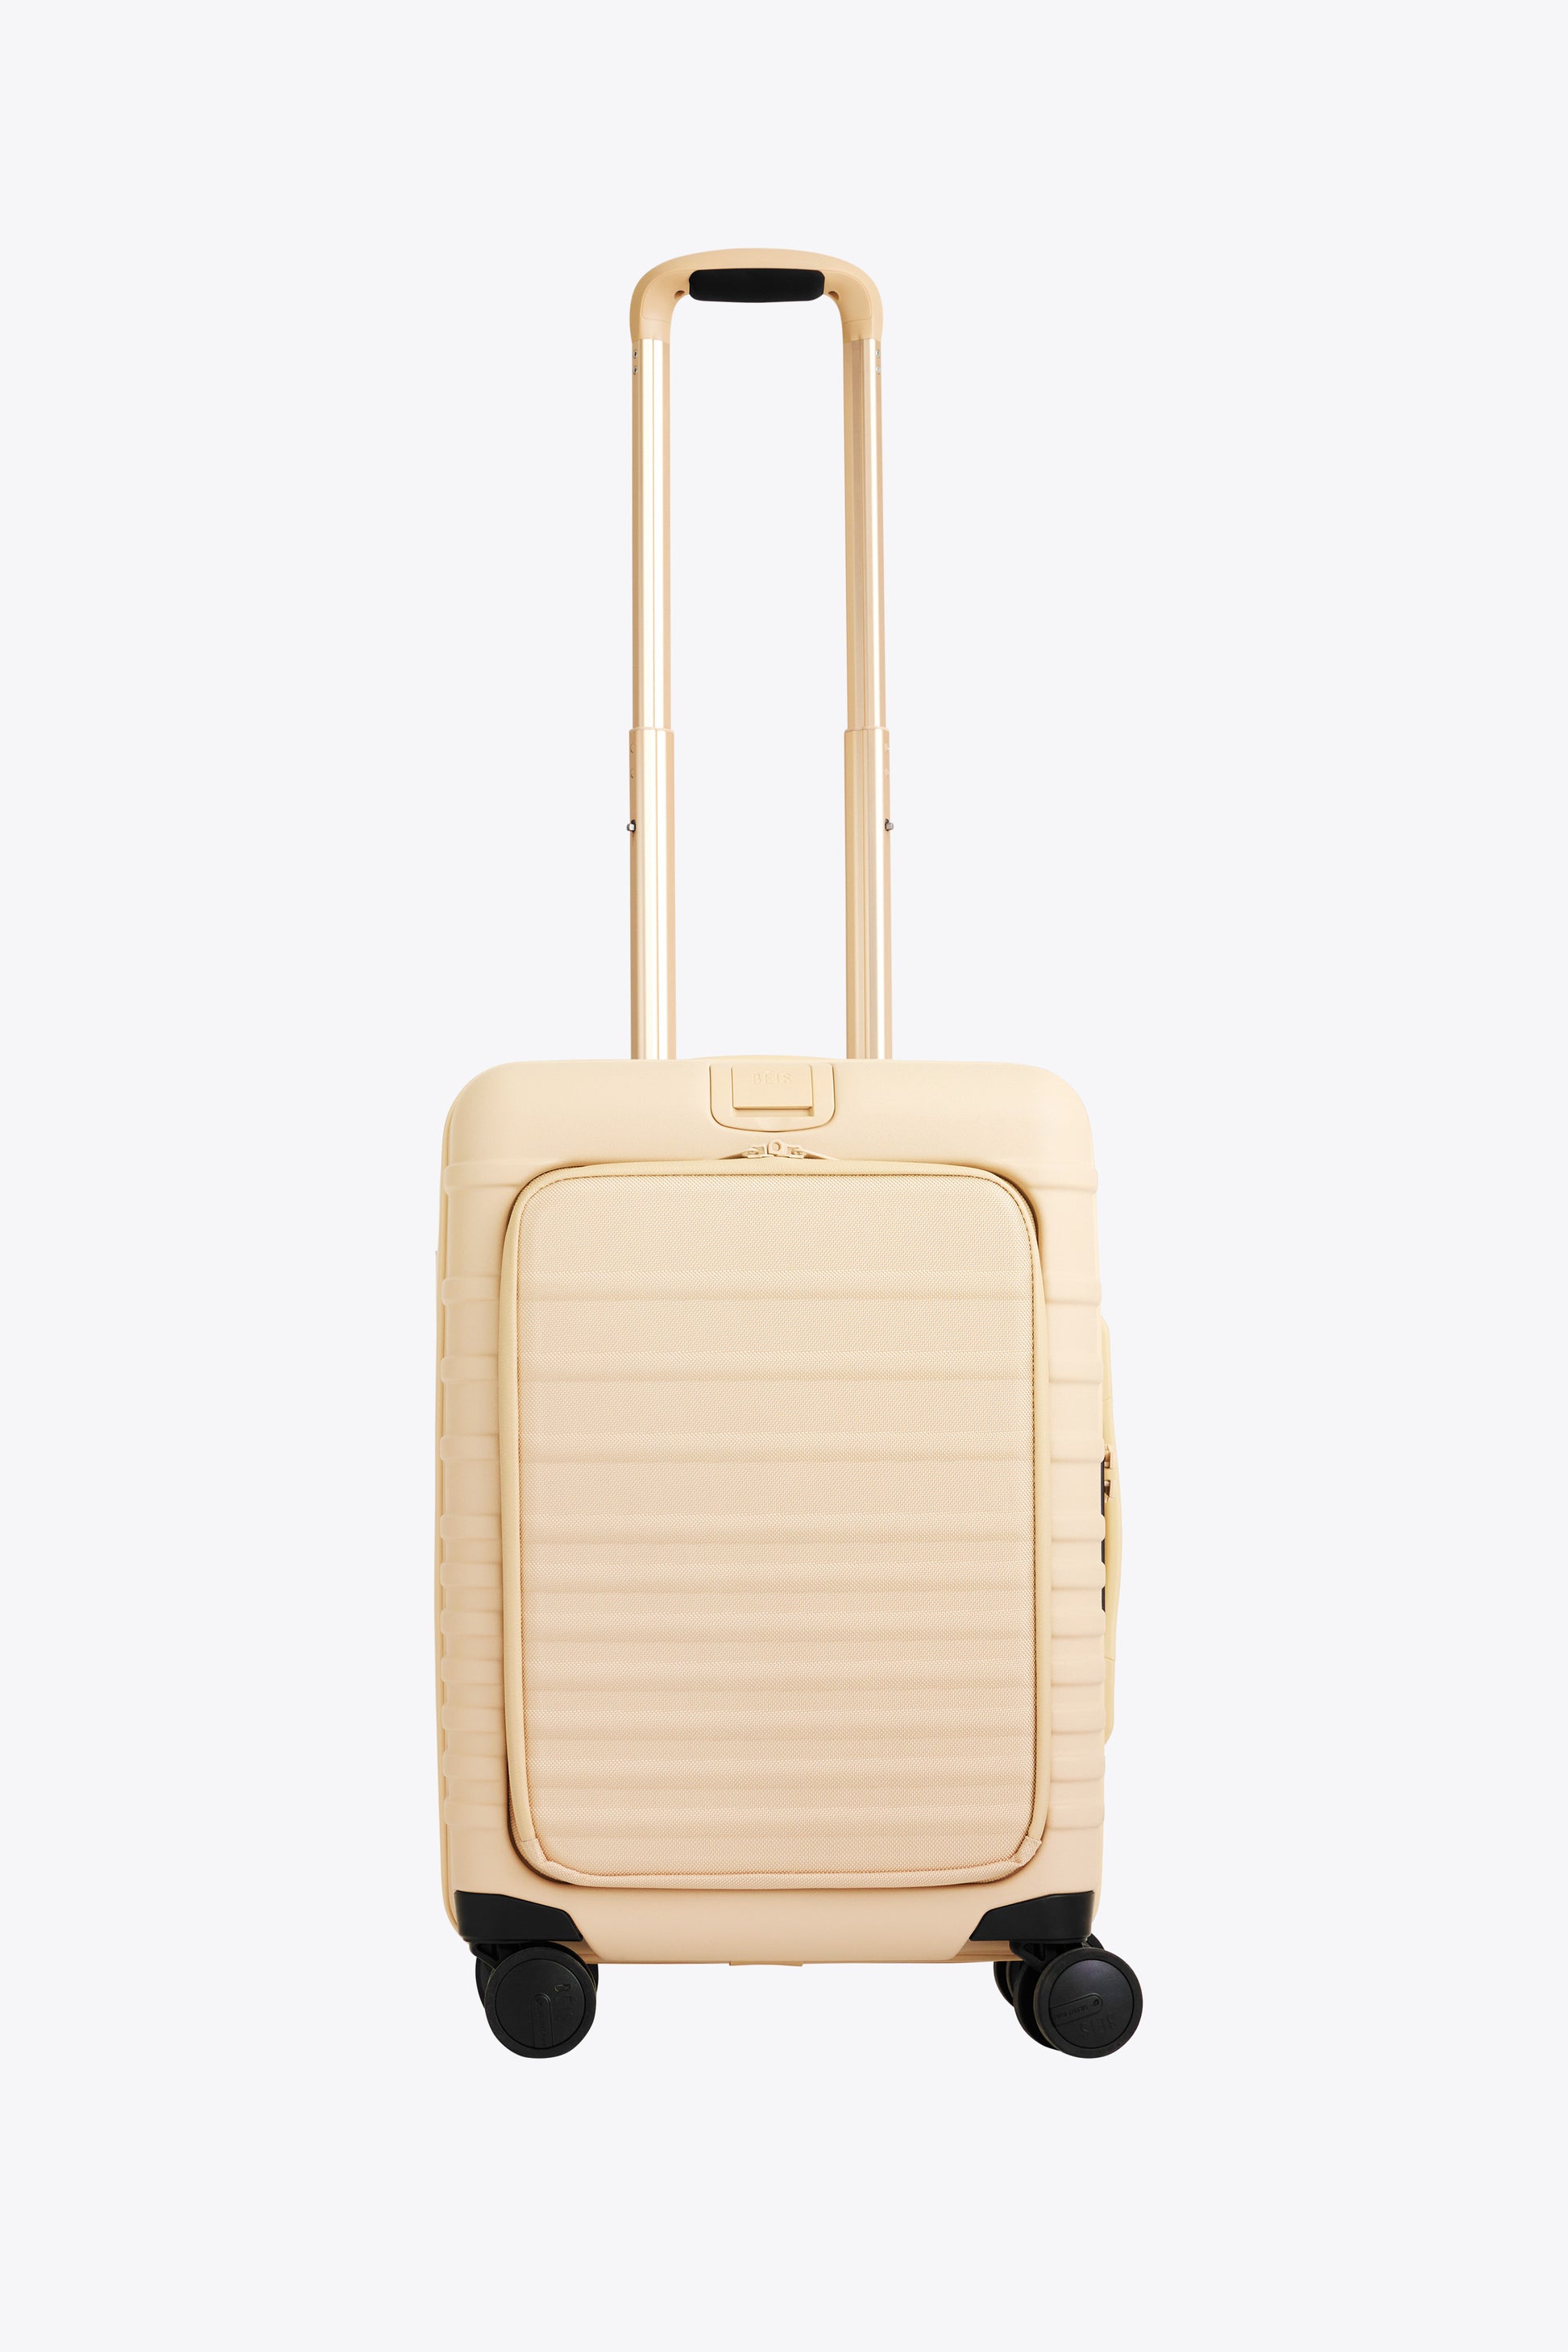 BÉIS 'The Front Pocket Carry-On' In Beige - Beige Carry-On Luggage With  Front Pocket